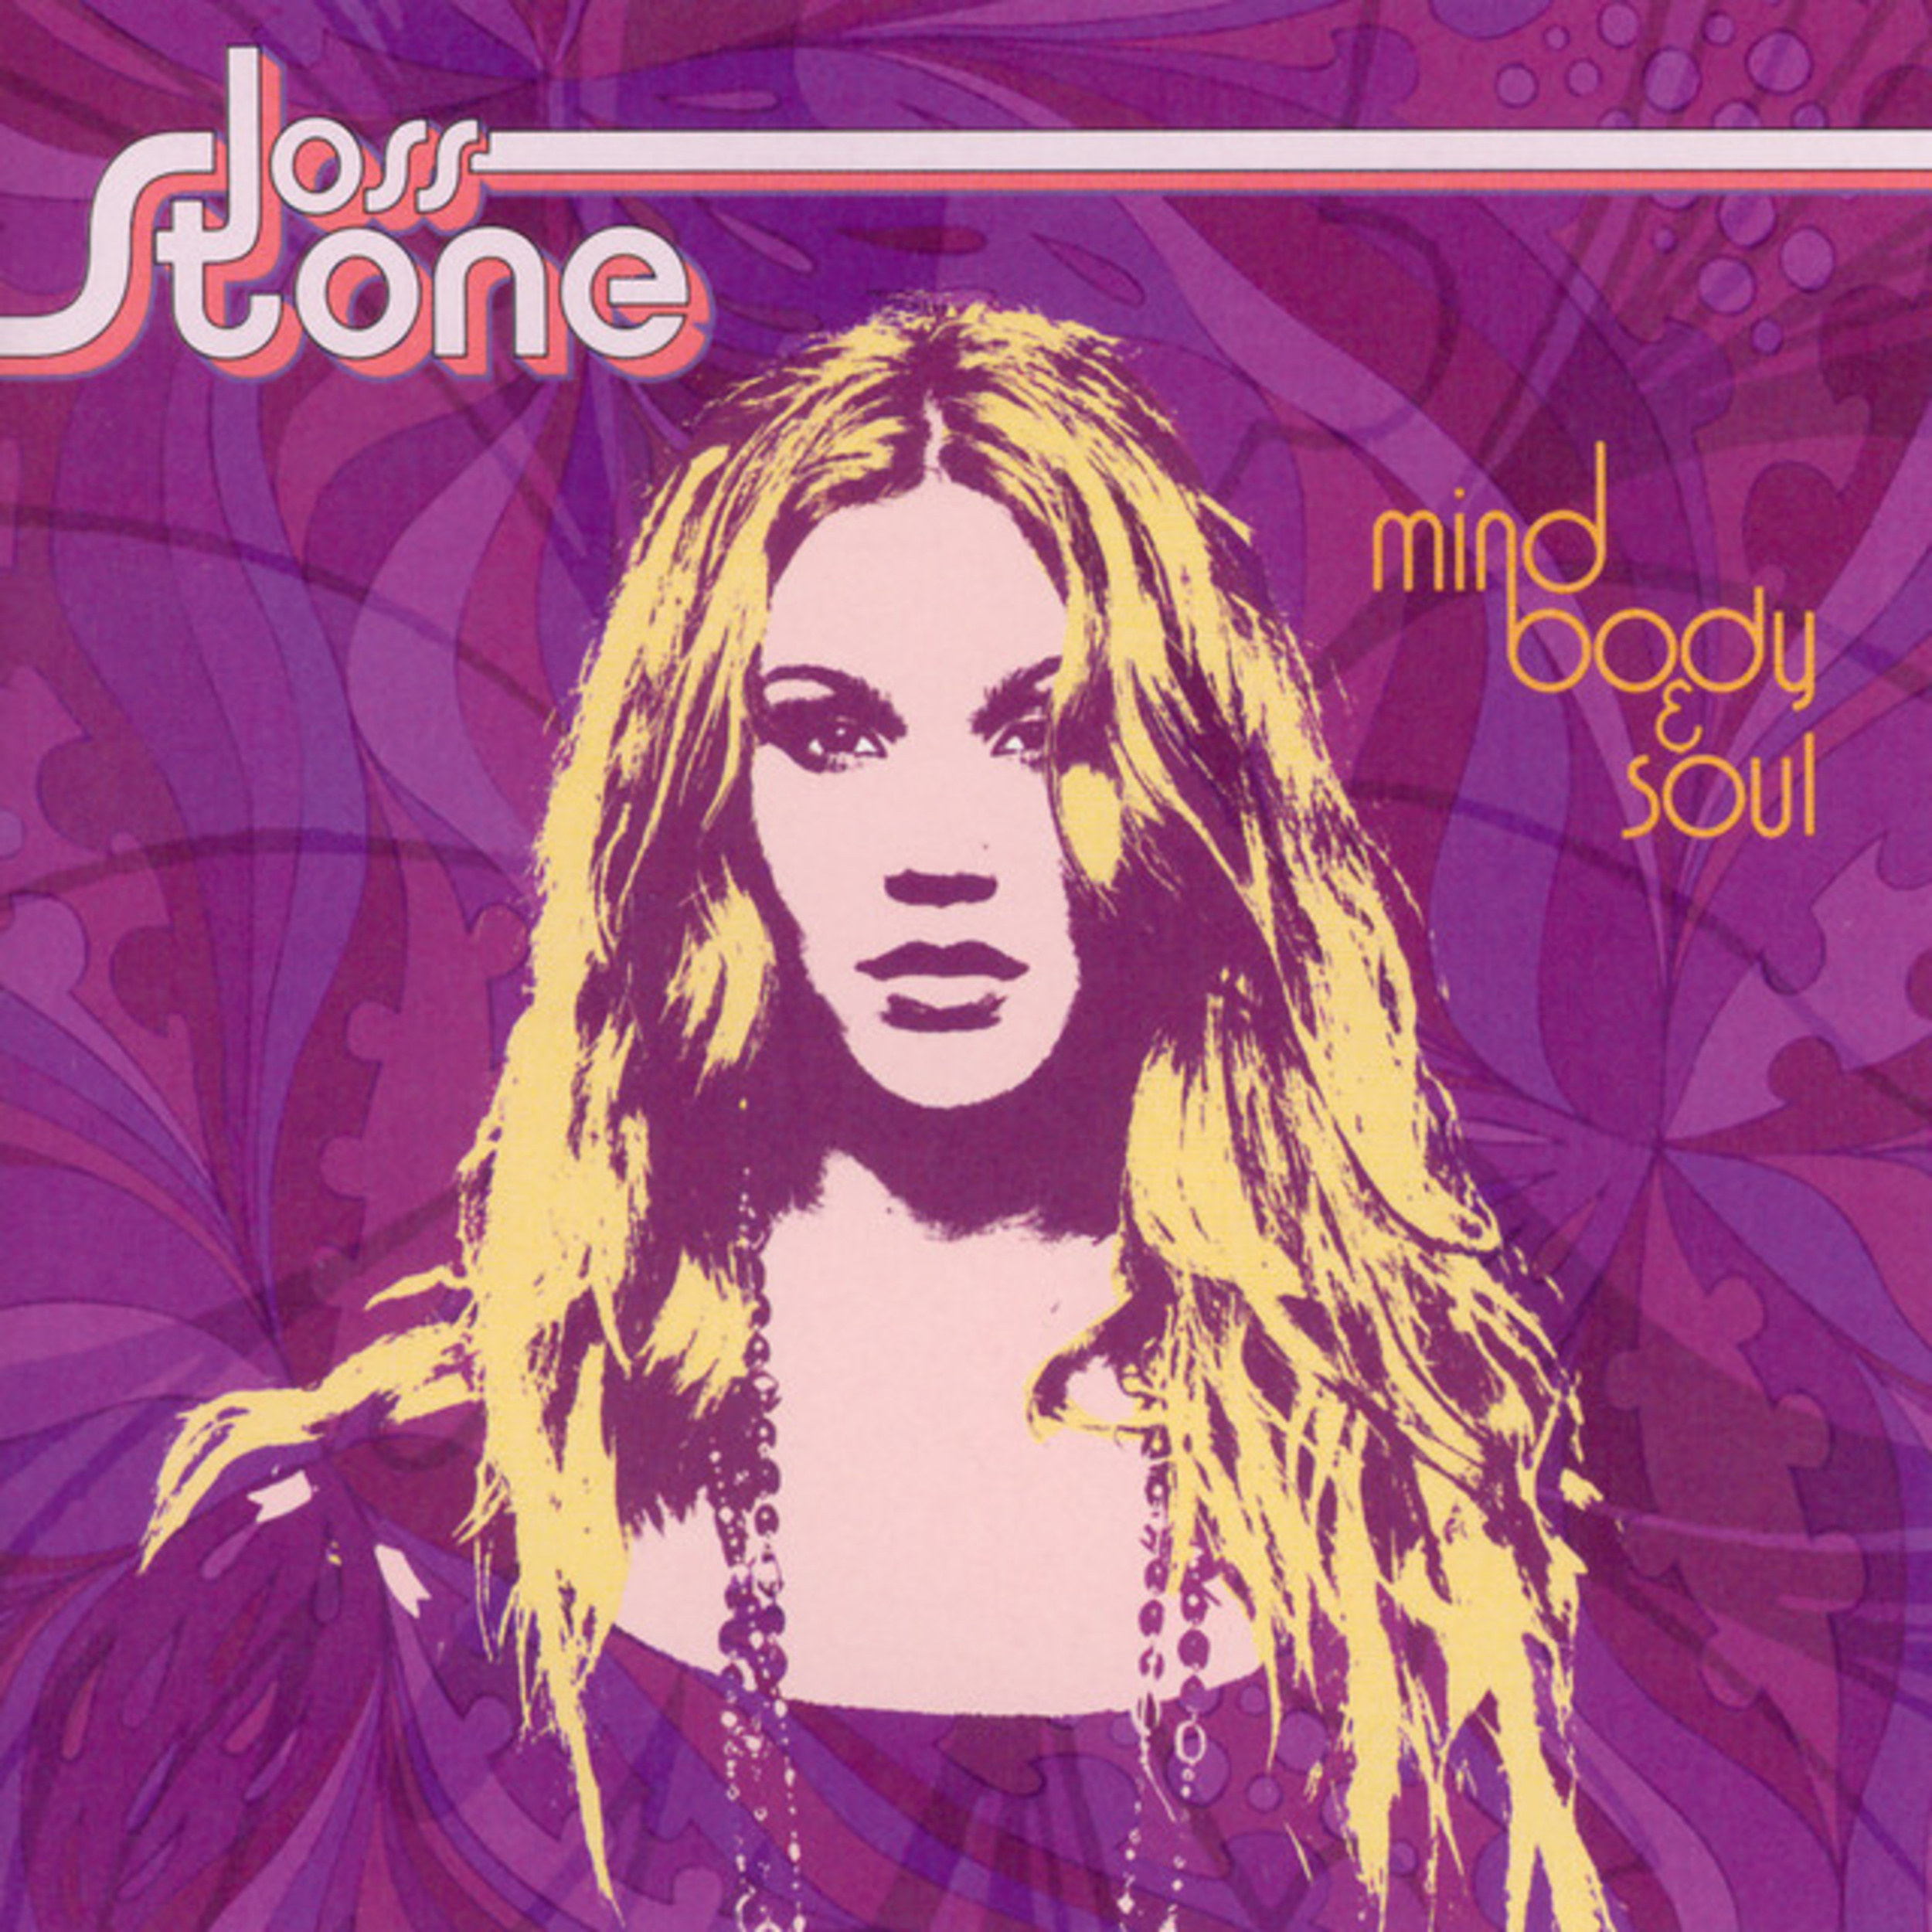 <p>Joss Stone's sophomore album, <em>Mind Body & Soul</em>, is the perfect title for a singer known for beaming with soulful and funky musicianship. Stone was only 17 years old at the time but had a voice beyond her years. It's no wonder she was mentored and produced by soulful singer Betty Wright to help hone her sound. Some of the album's hit singles include <a href="https://www.youtube.com/watch?v=rZ1MNVot42o">"You Had Me"</a> and "Spoiled." </p><p><a href='https://www.msn.com/en-us/community/channel/vid-cj9pqbr0vn9in2b6ddcd8sfgpfq6x6utp44fssrv6mc2gtybw0us'>Did you enjoy this slideshow? Follow us on MSN to see more of our exclusive entertainment content.</a></p>